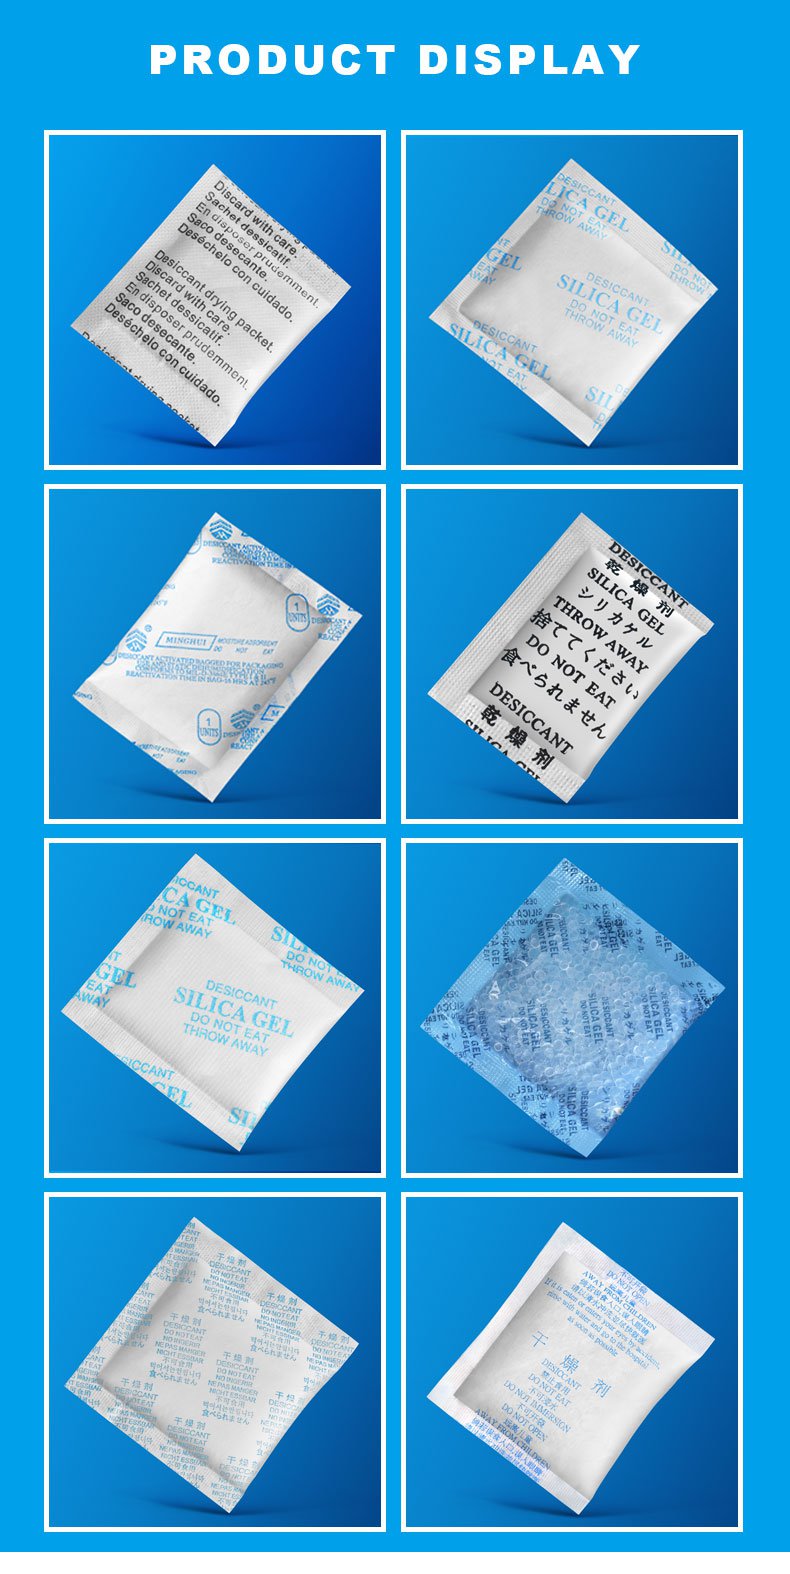 montmorillonite clay desiccant bags disiplay